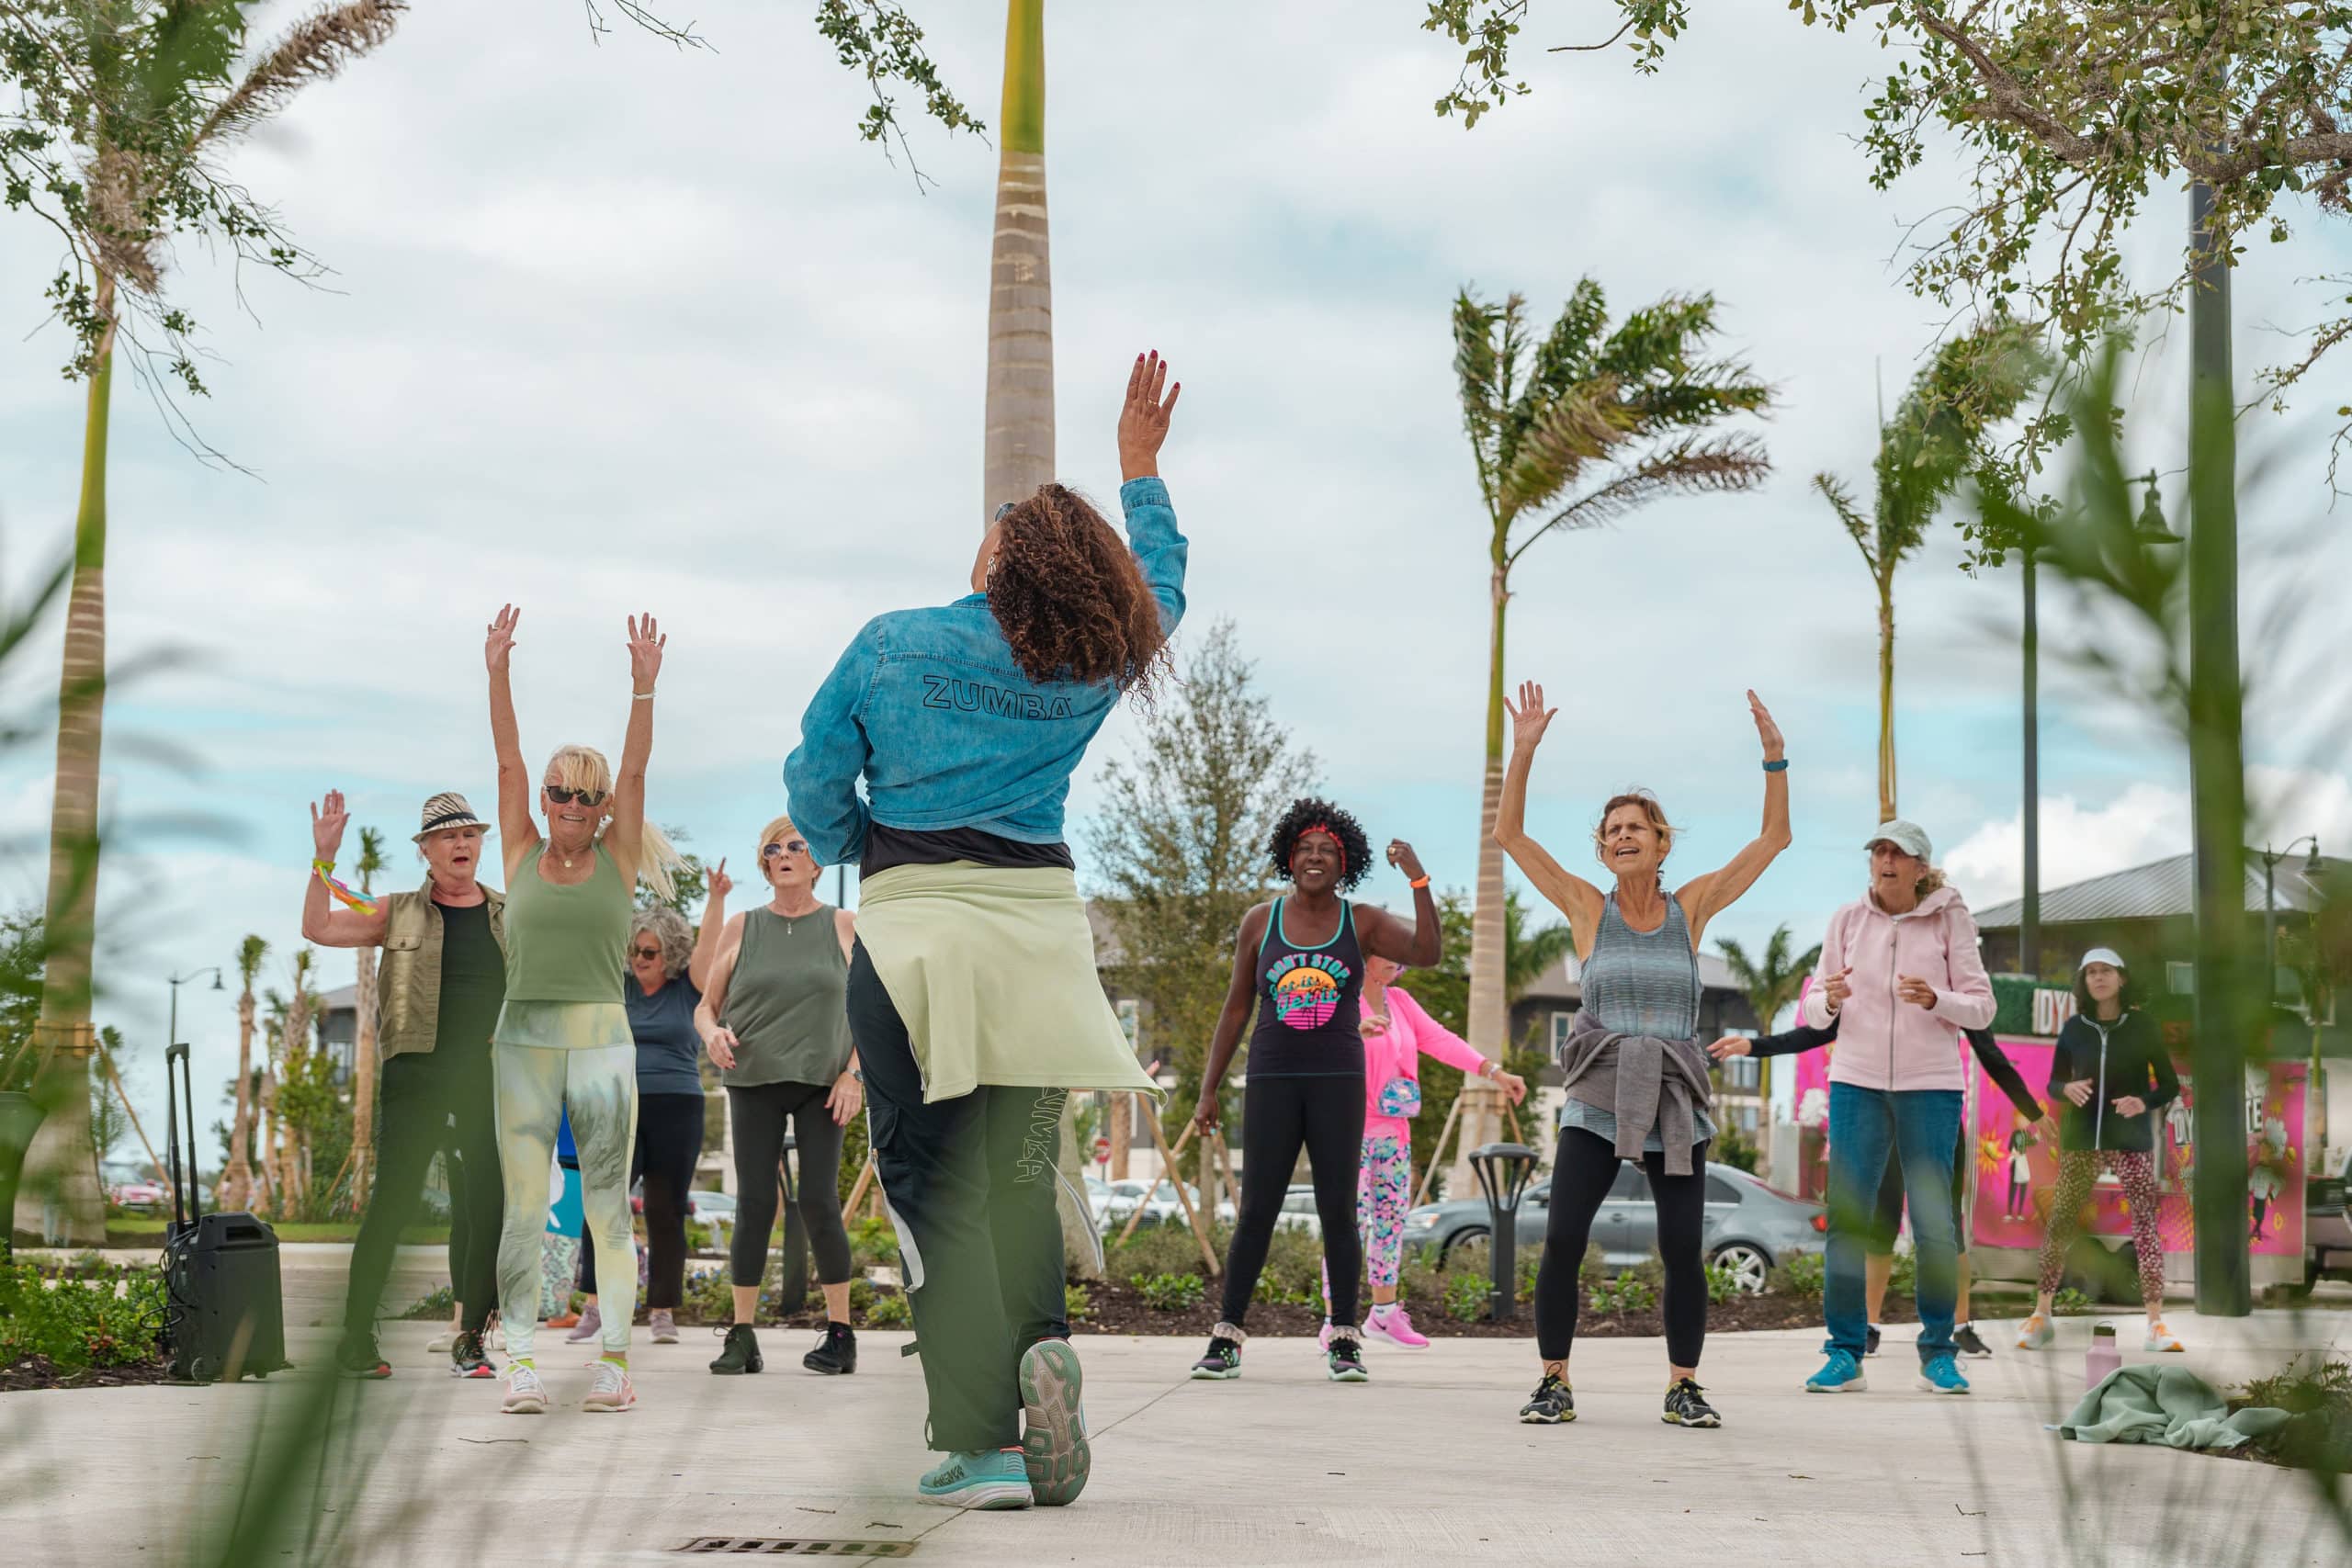 People with their arms raised in the air during Zumba class in Downtown Wellen